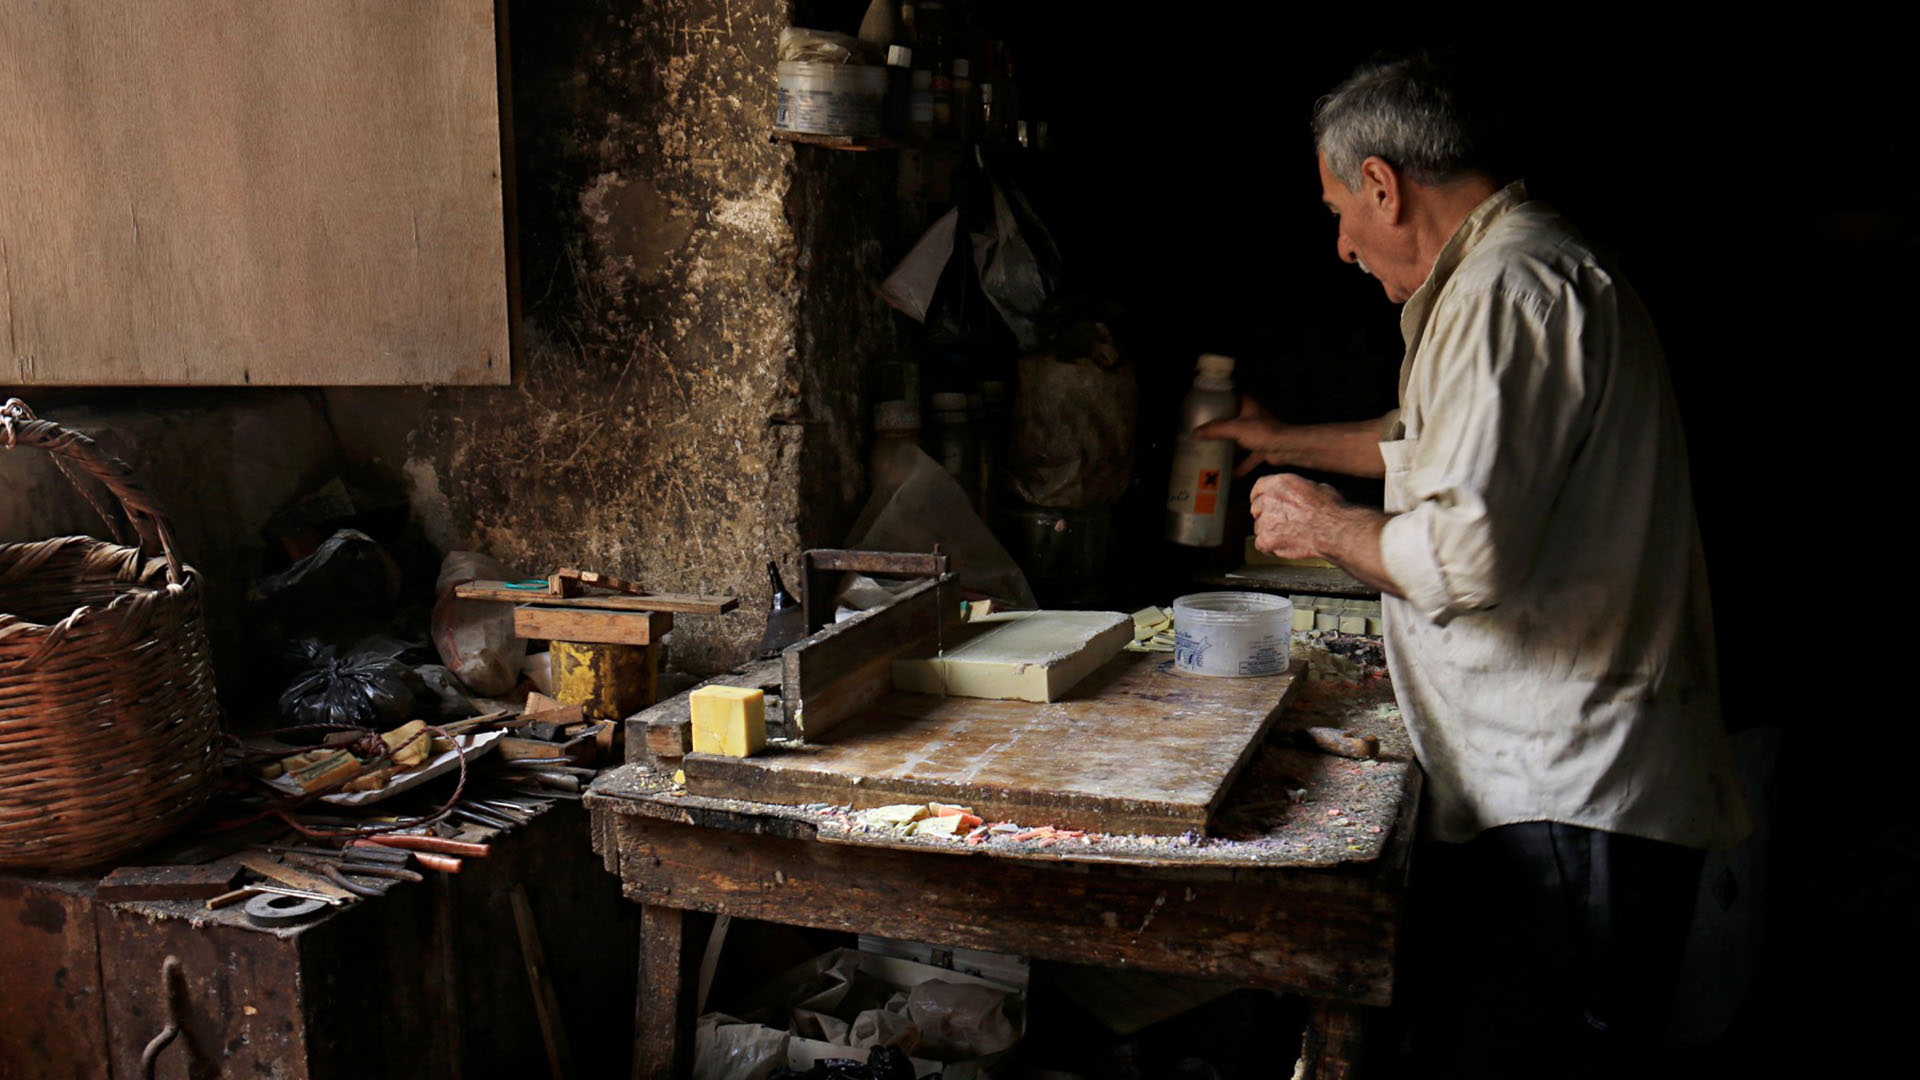 Photographs capture the expertise of a skilled craftsman from Aleppo as he carefully cuts a soap bar with precision.